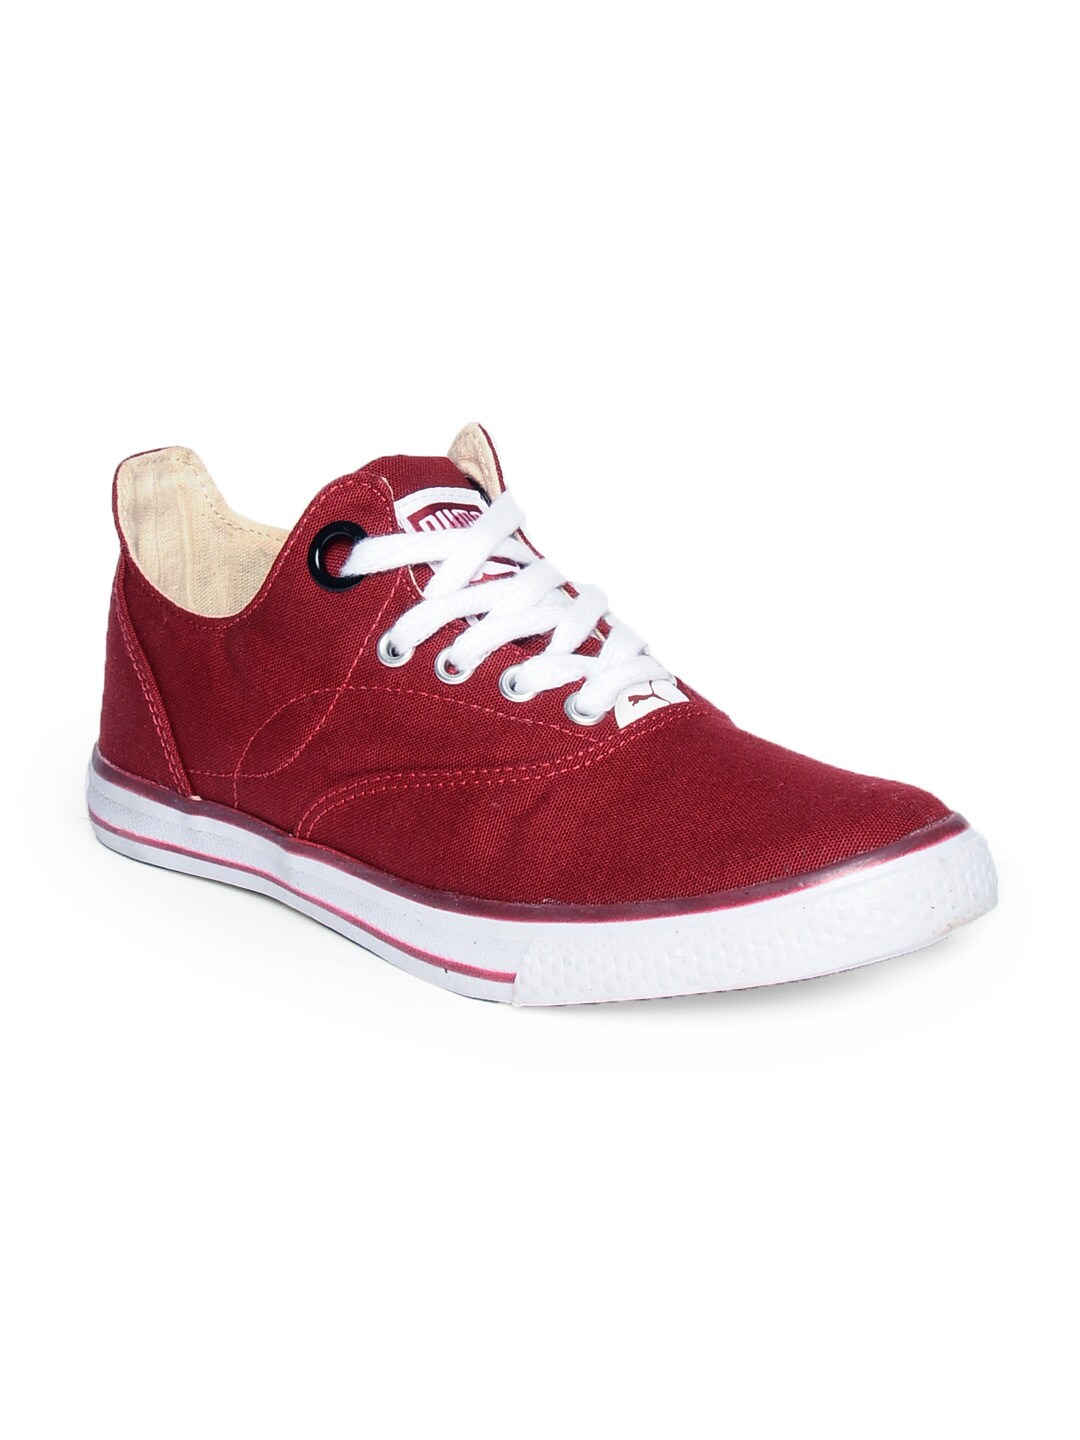 Puma Unisex Limnos Red Casual Shoes